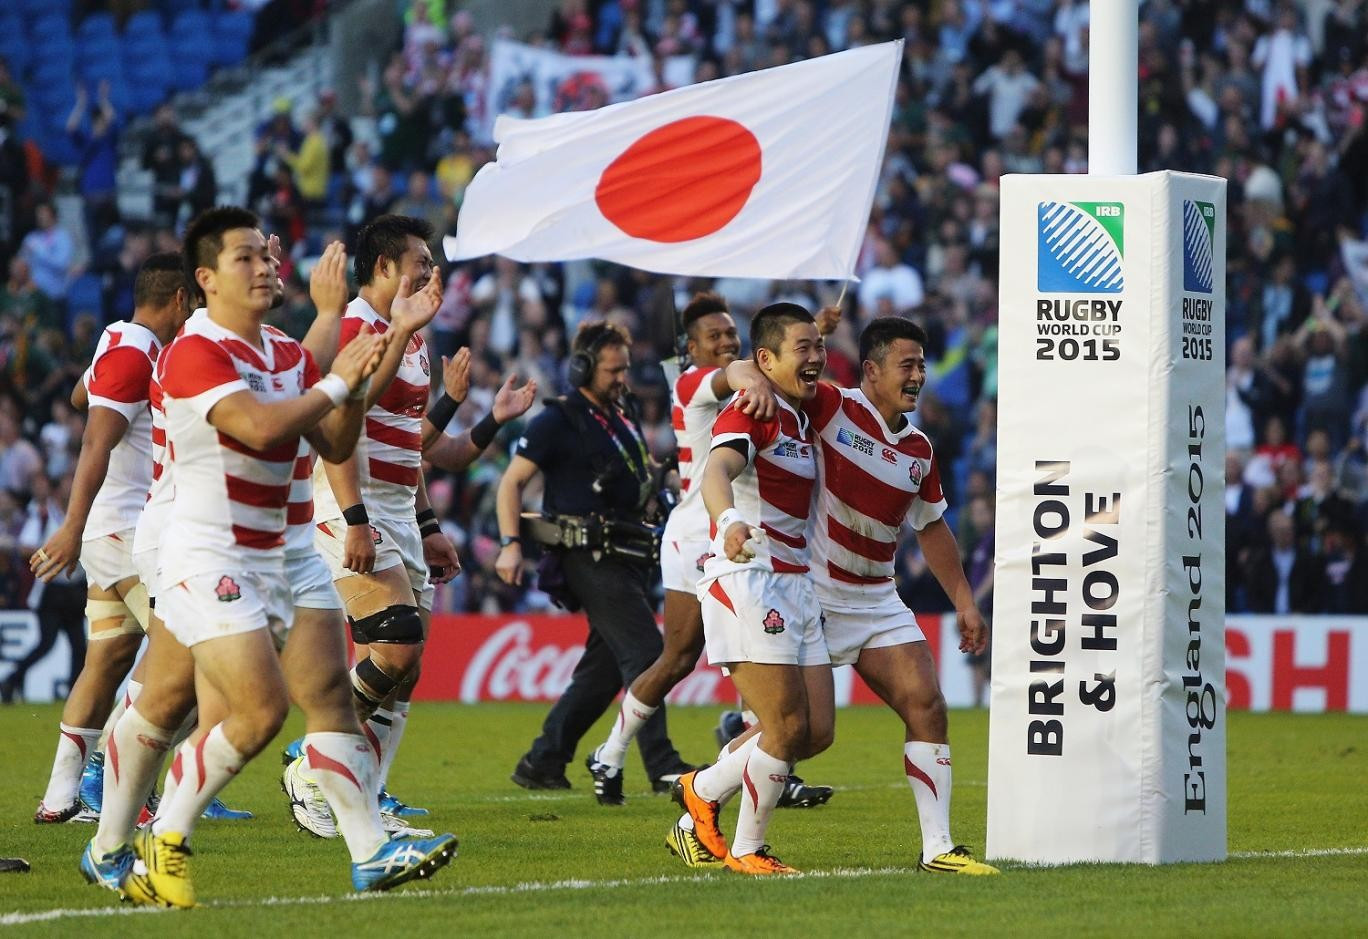 Japan caused one of the biggest shocks in the history of the Rugby World Cup when they beat South Africa during the 2015 tournament in England ©Getty Images